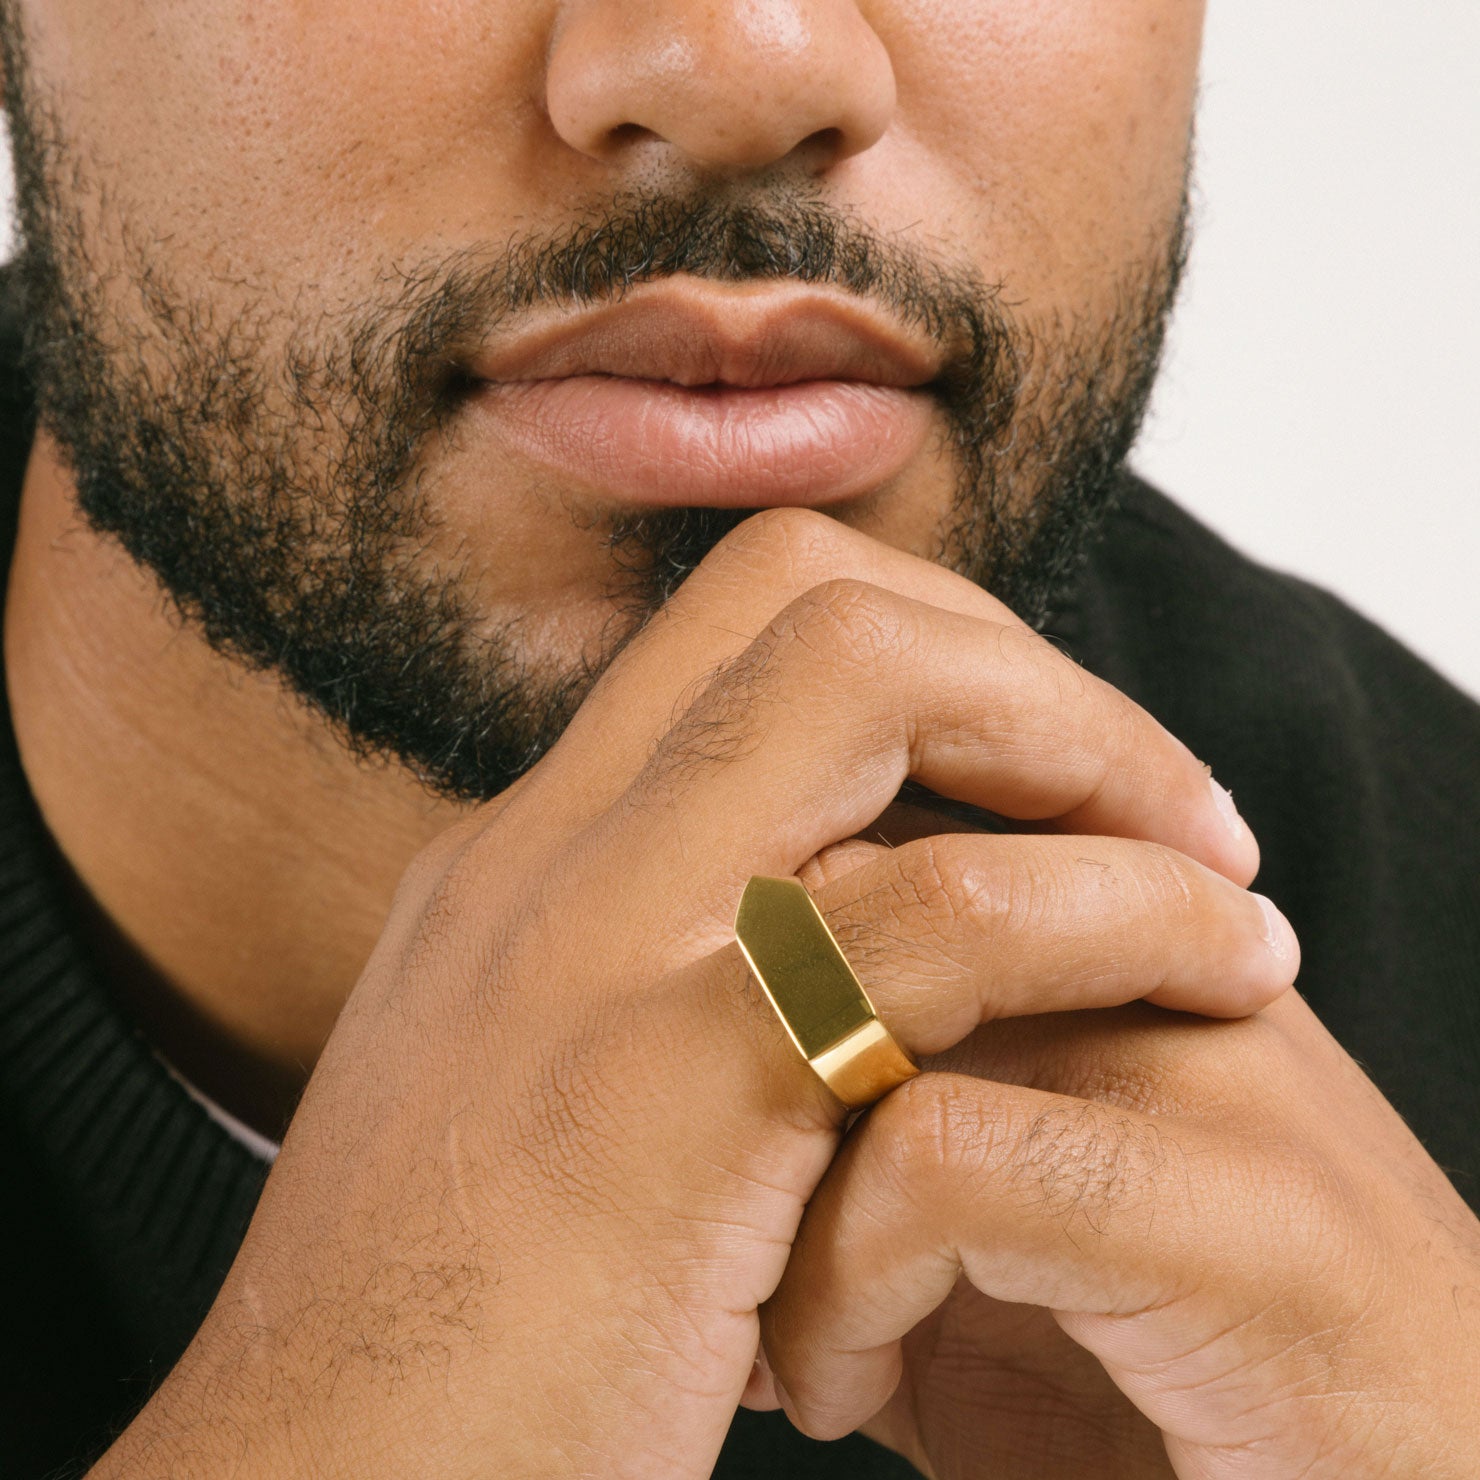 A model wearing the Pointed Band Ring is crafted in 18K Gold Plating to give it a luxurious look and feel. Measuring 8mm in width, its durable and non-tarnish finish makes this an ideal accessory for everyday wear. Water-resistant for added protection.